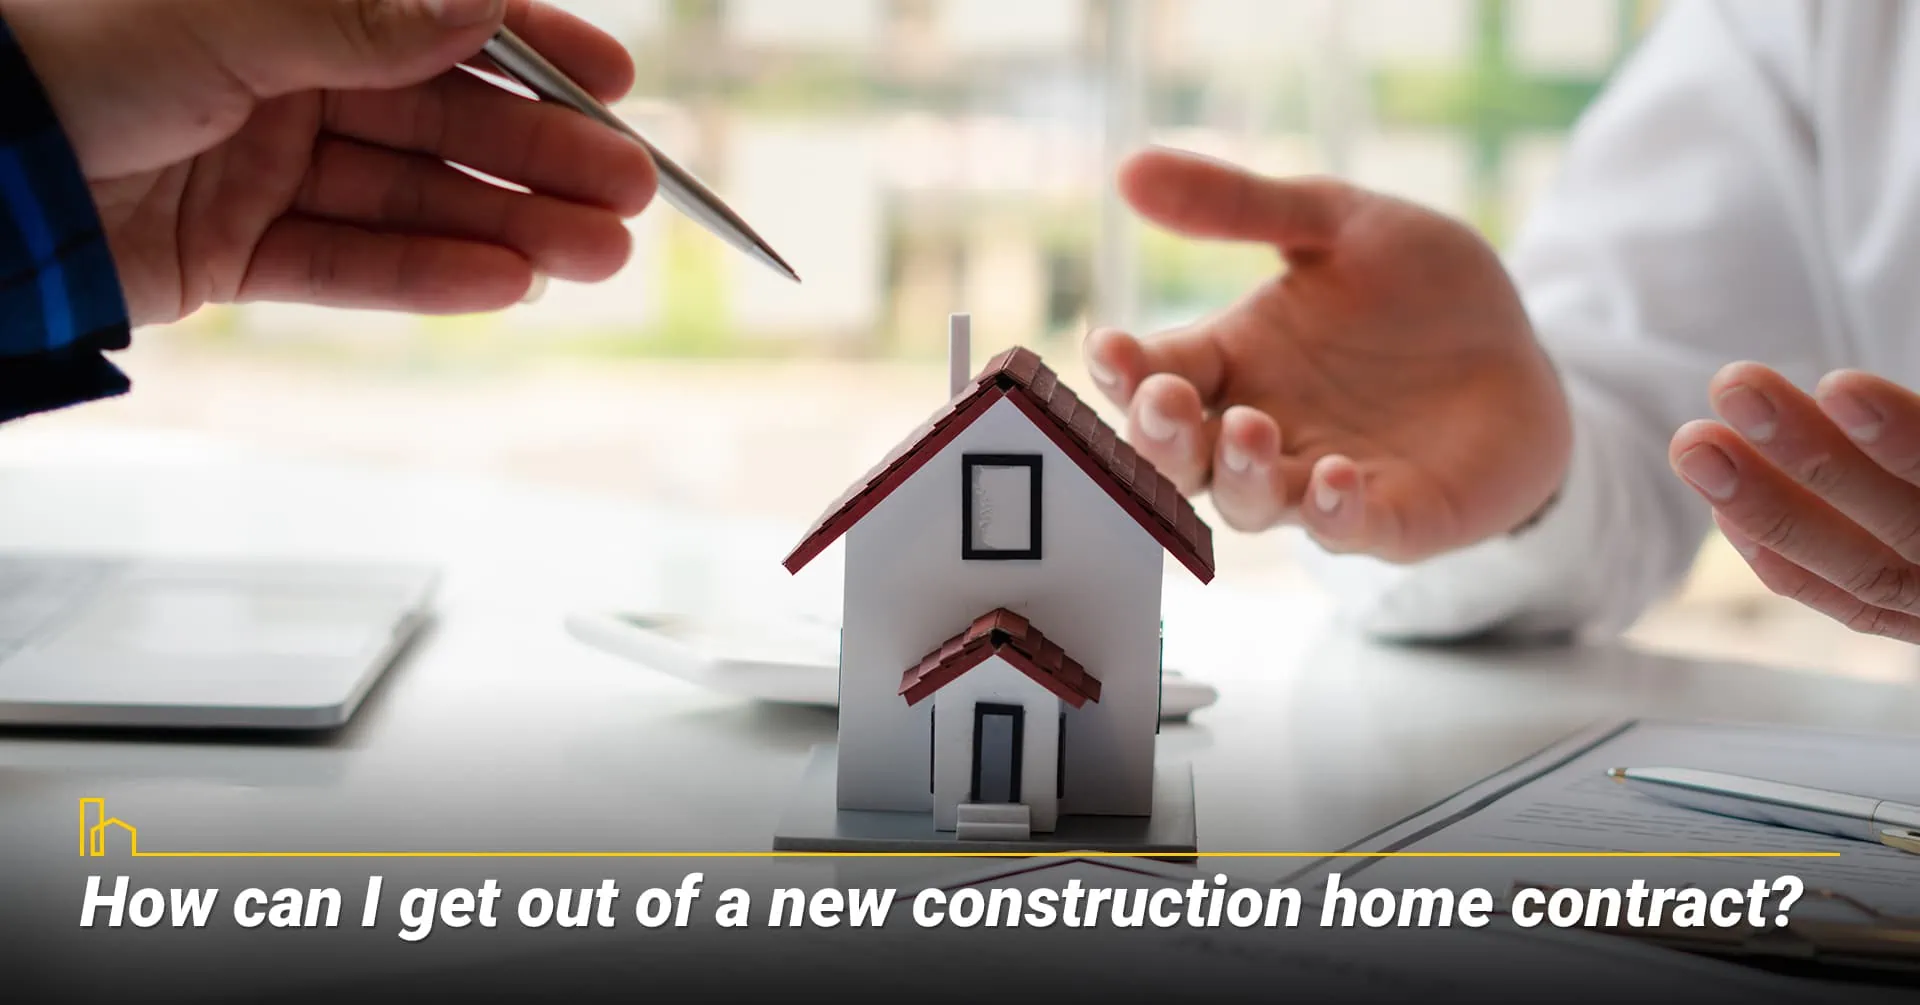 How can I get out of a new construction home contract?